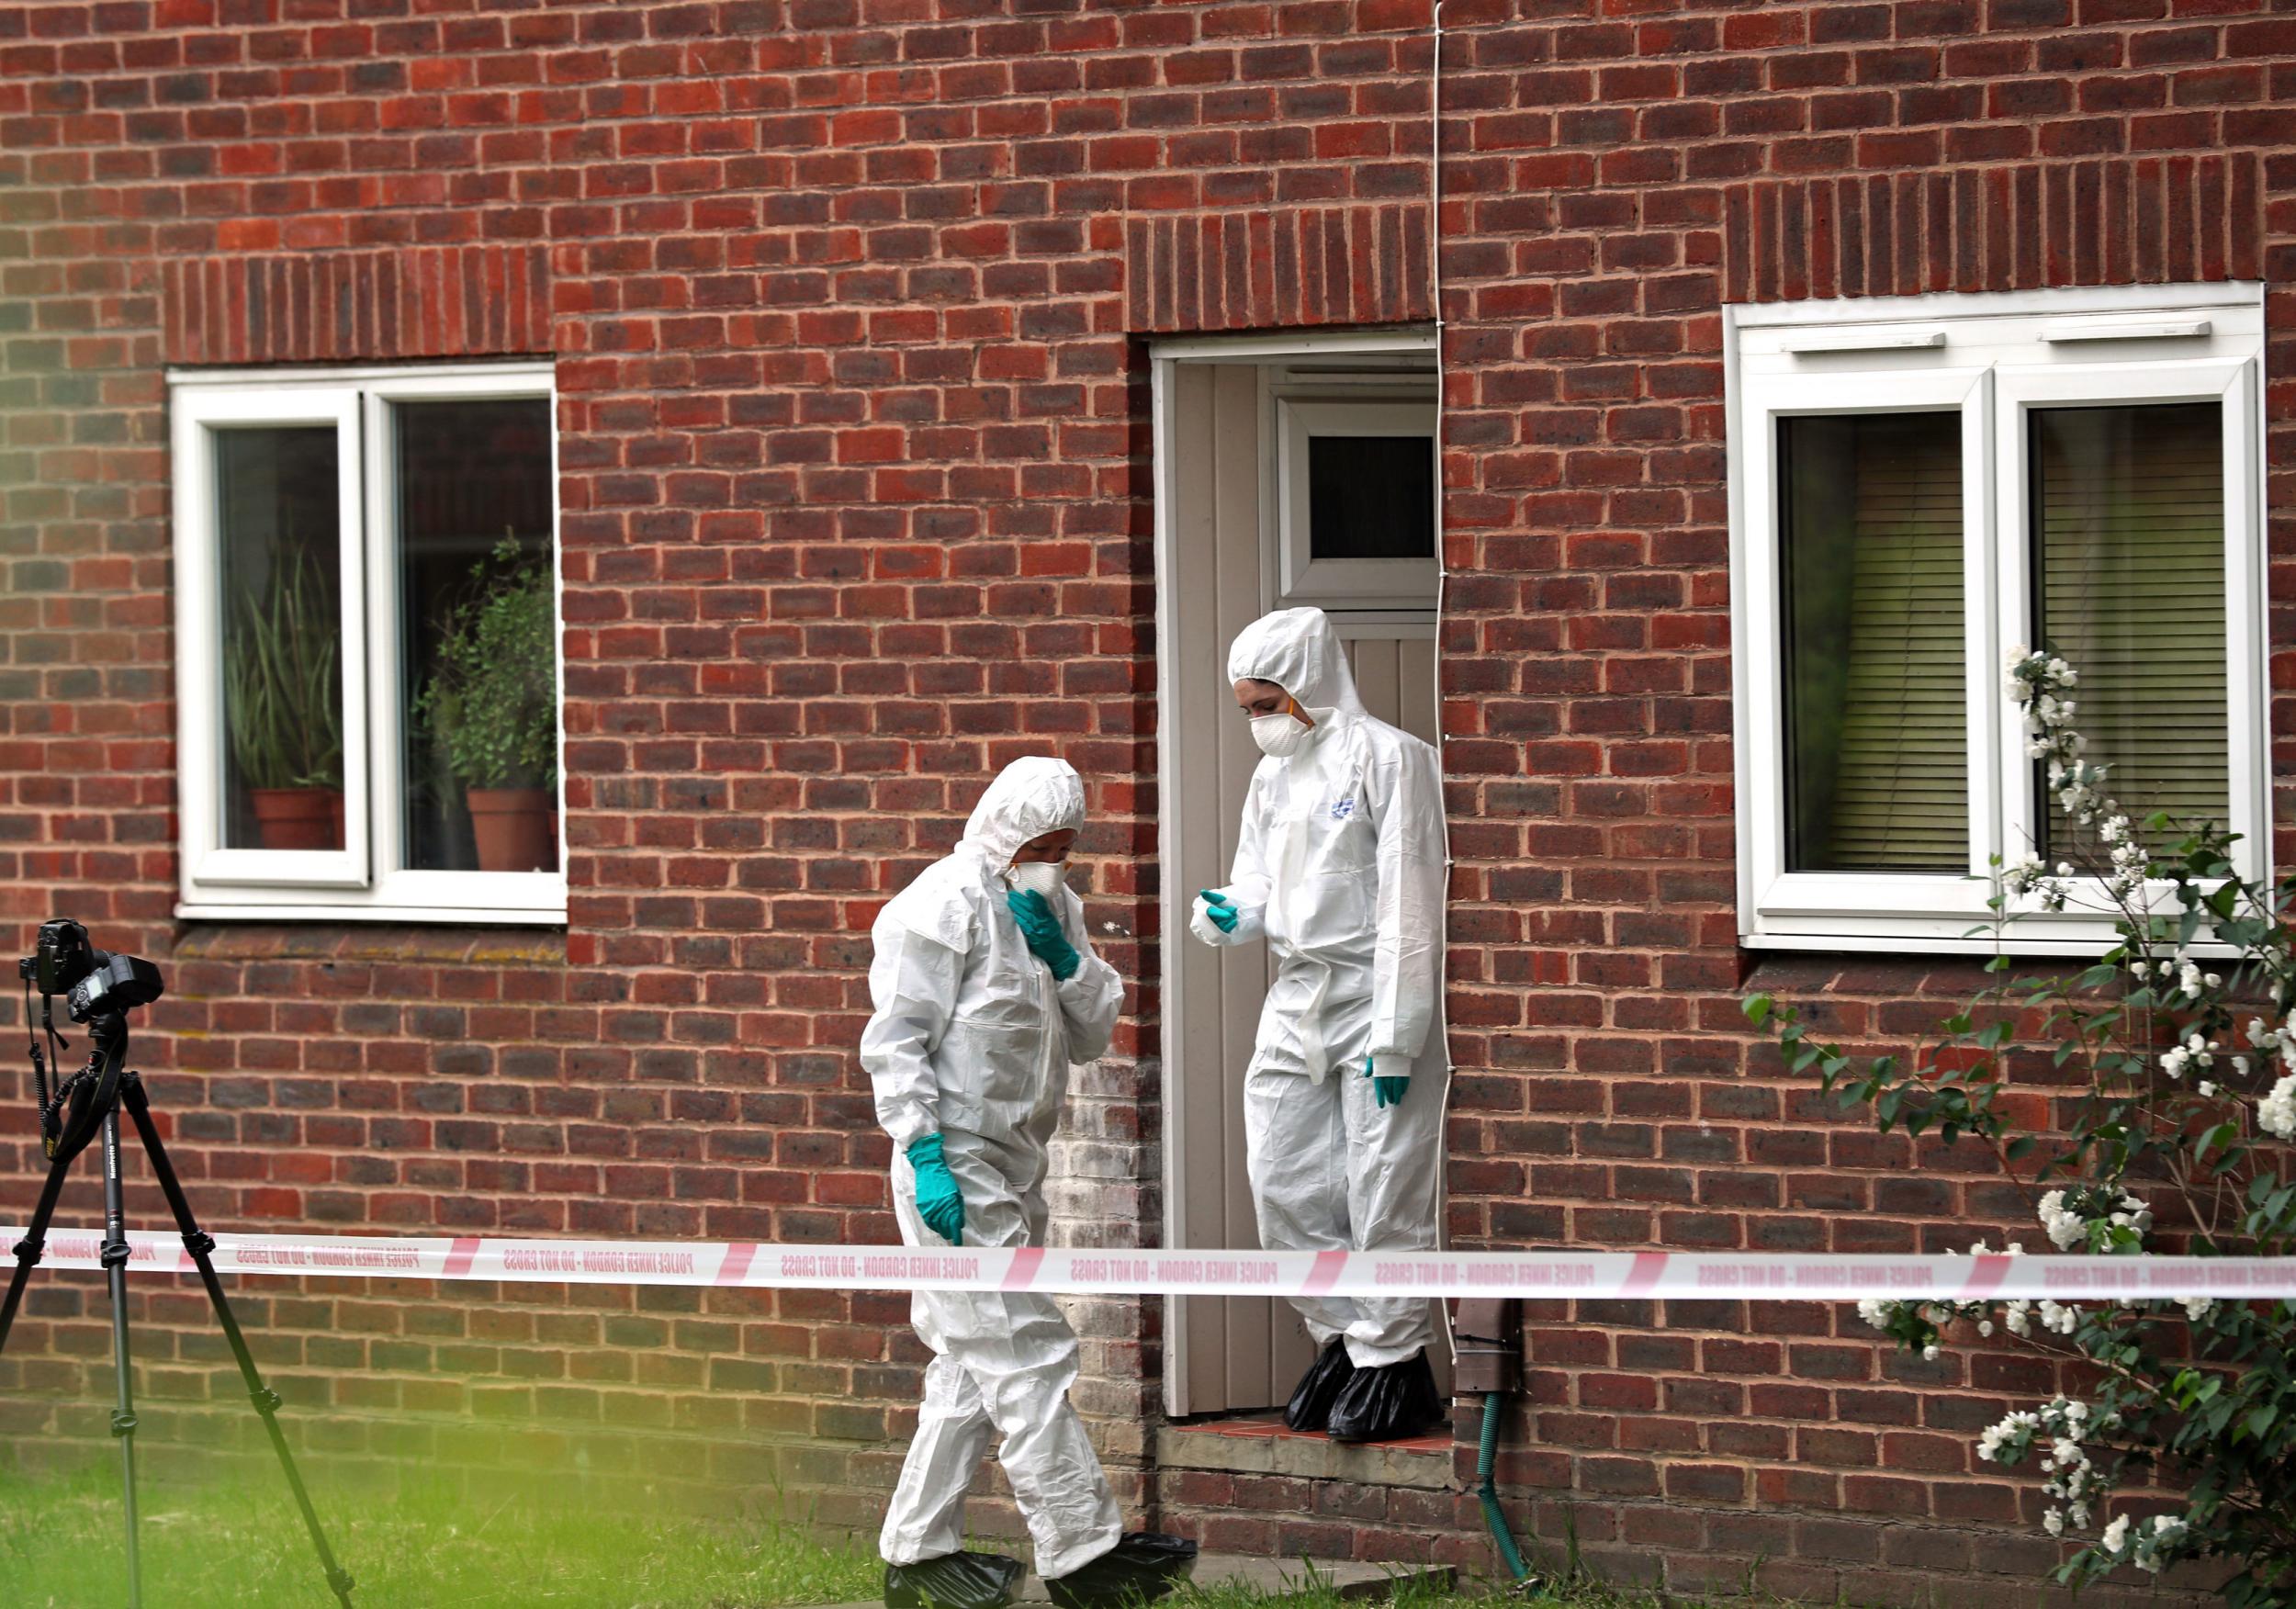 Forensics officers at the Hanworth, west London home where an 11-month-old baby and a woman were stabbed